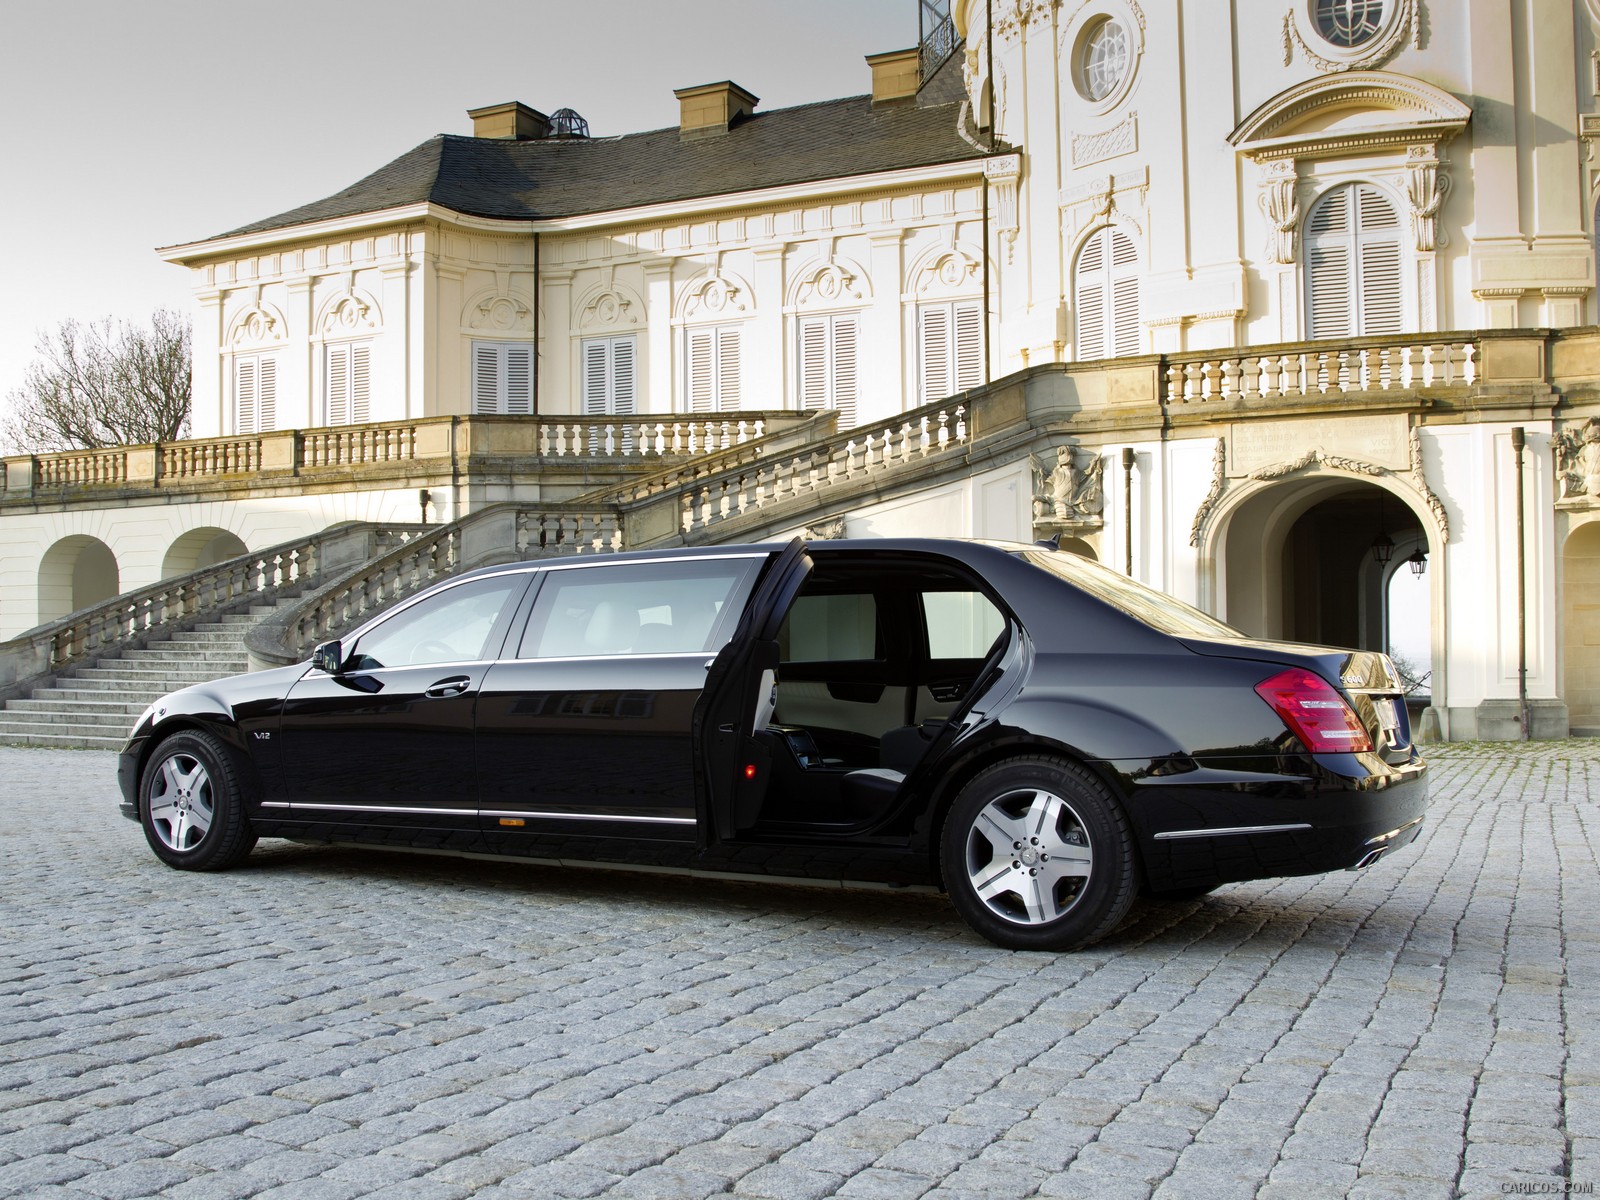 Mercedes-Benz S600 Pullman Guard  - Side, #15 of 24